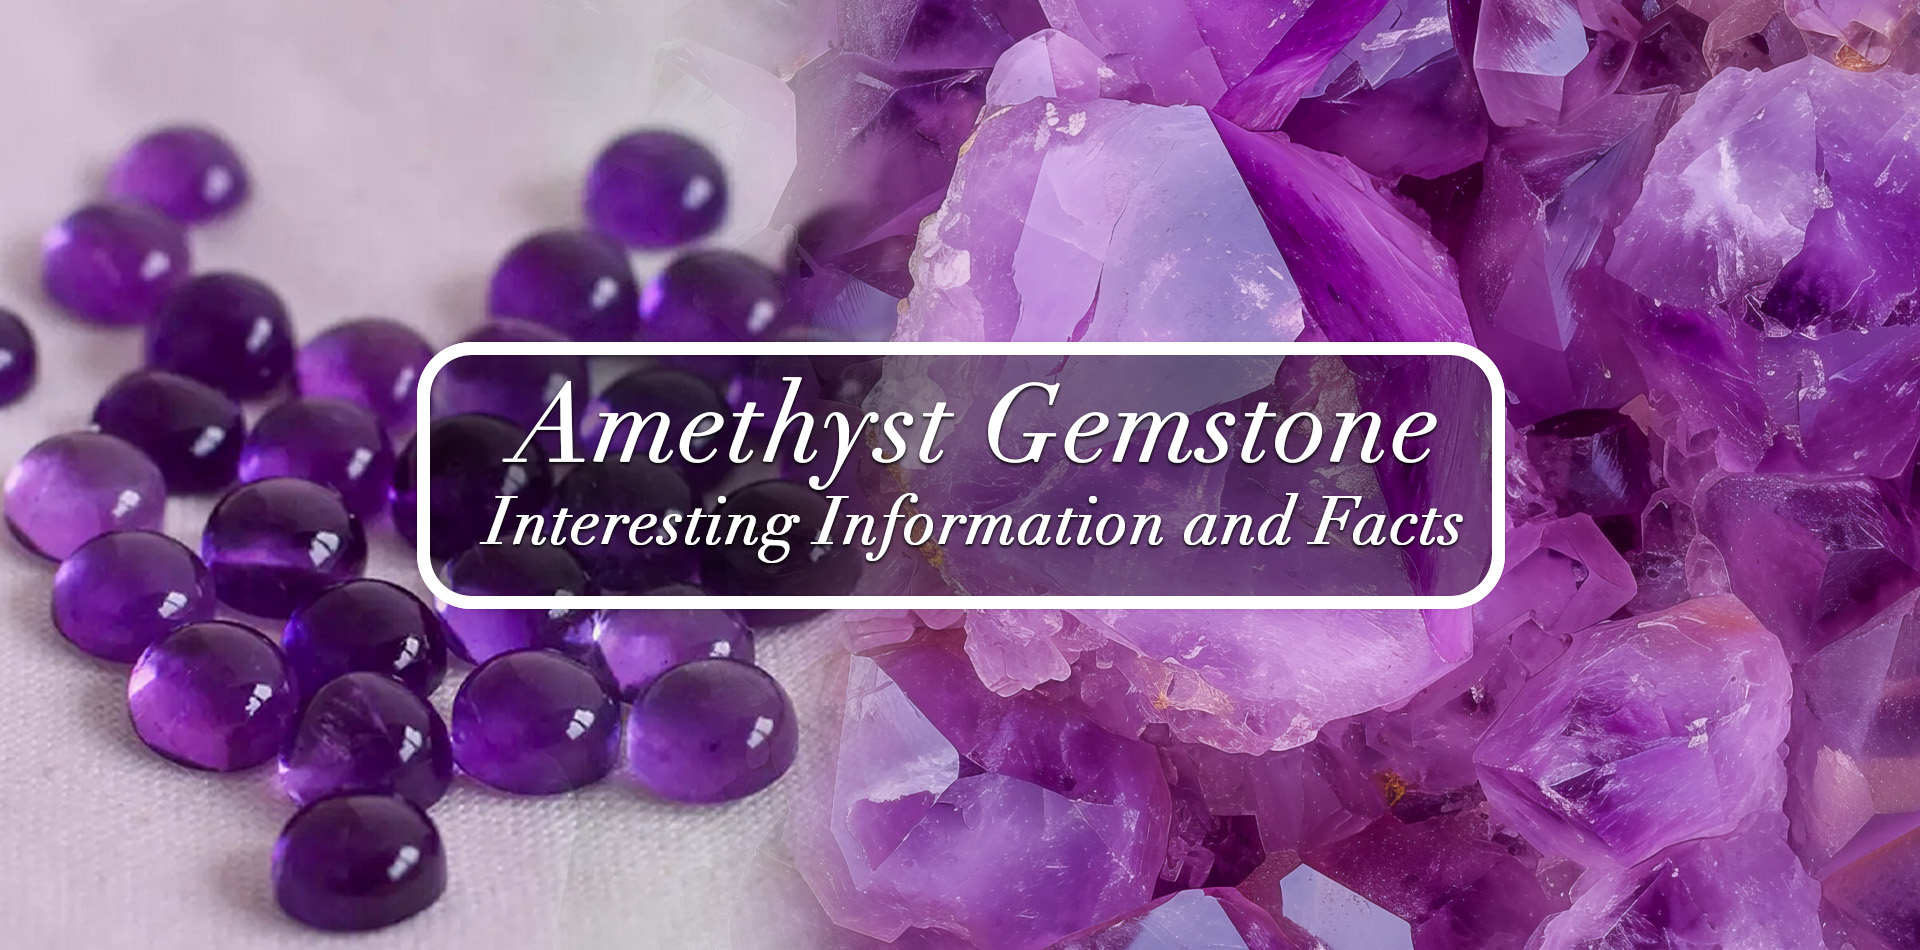 Amethyst Gemstone: Interesting Information and Facts